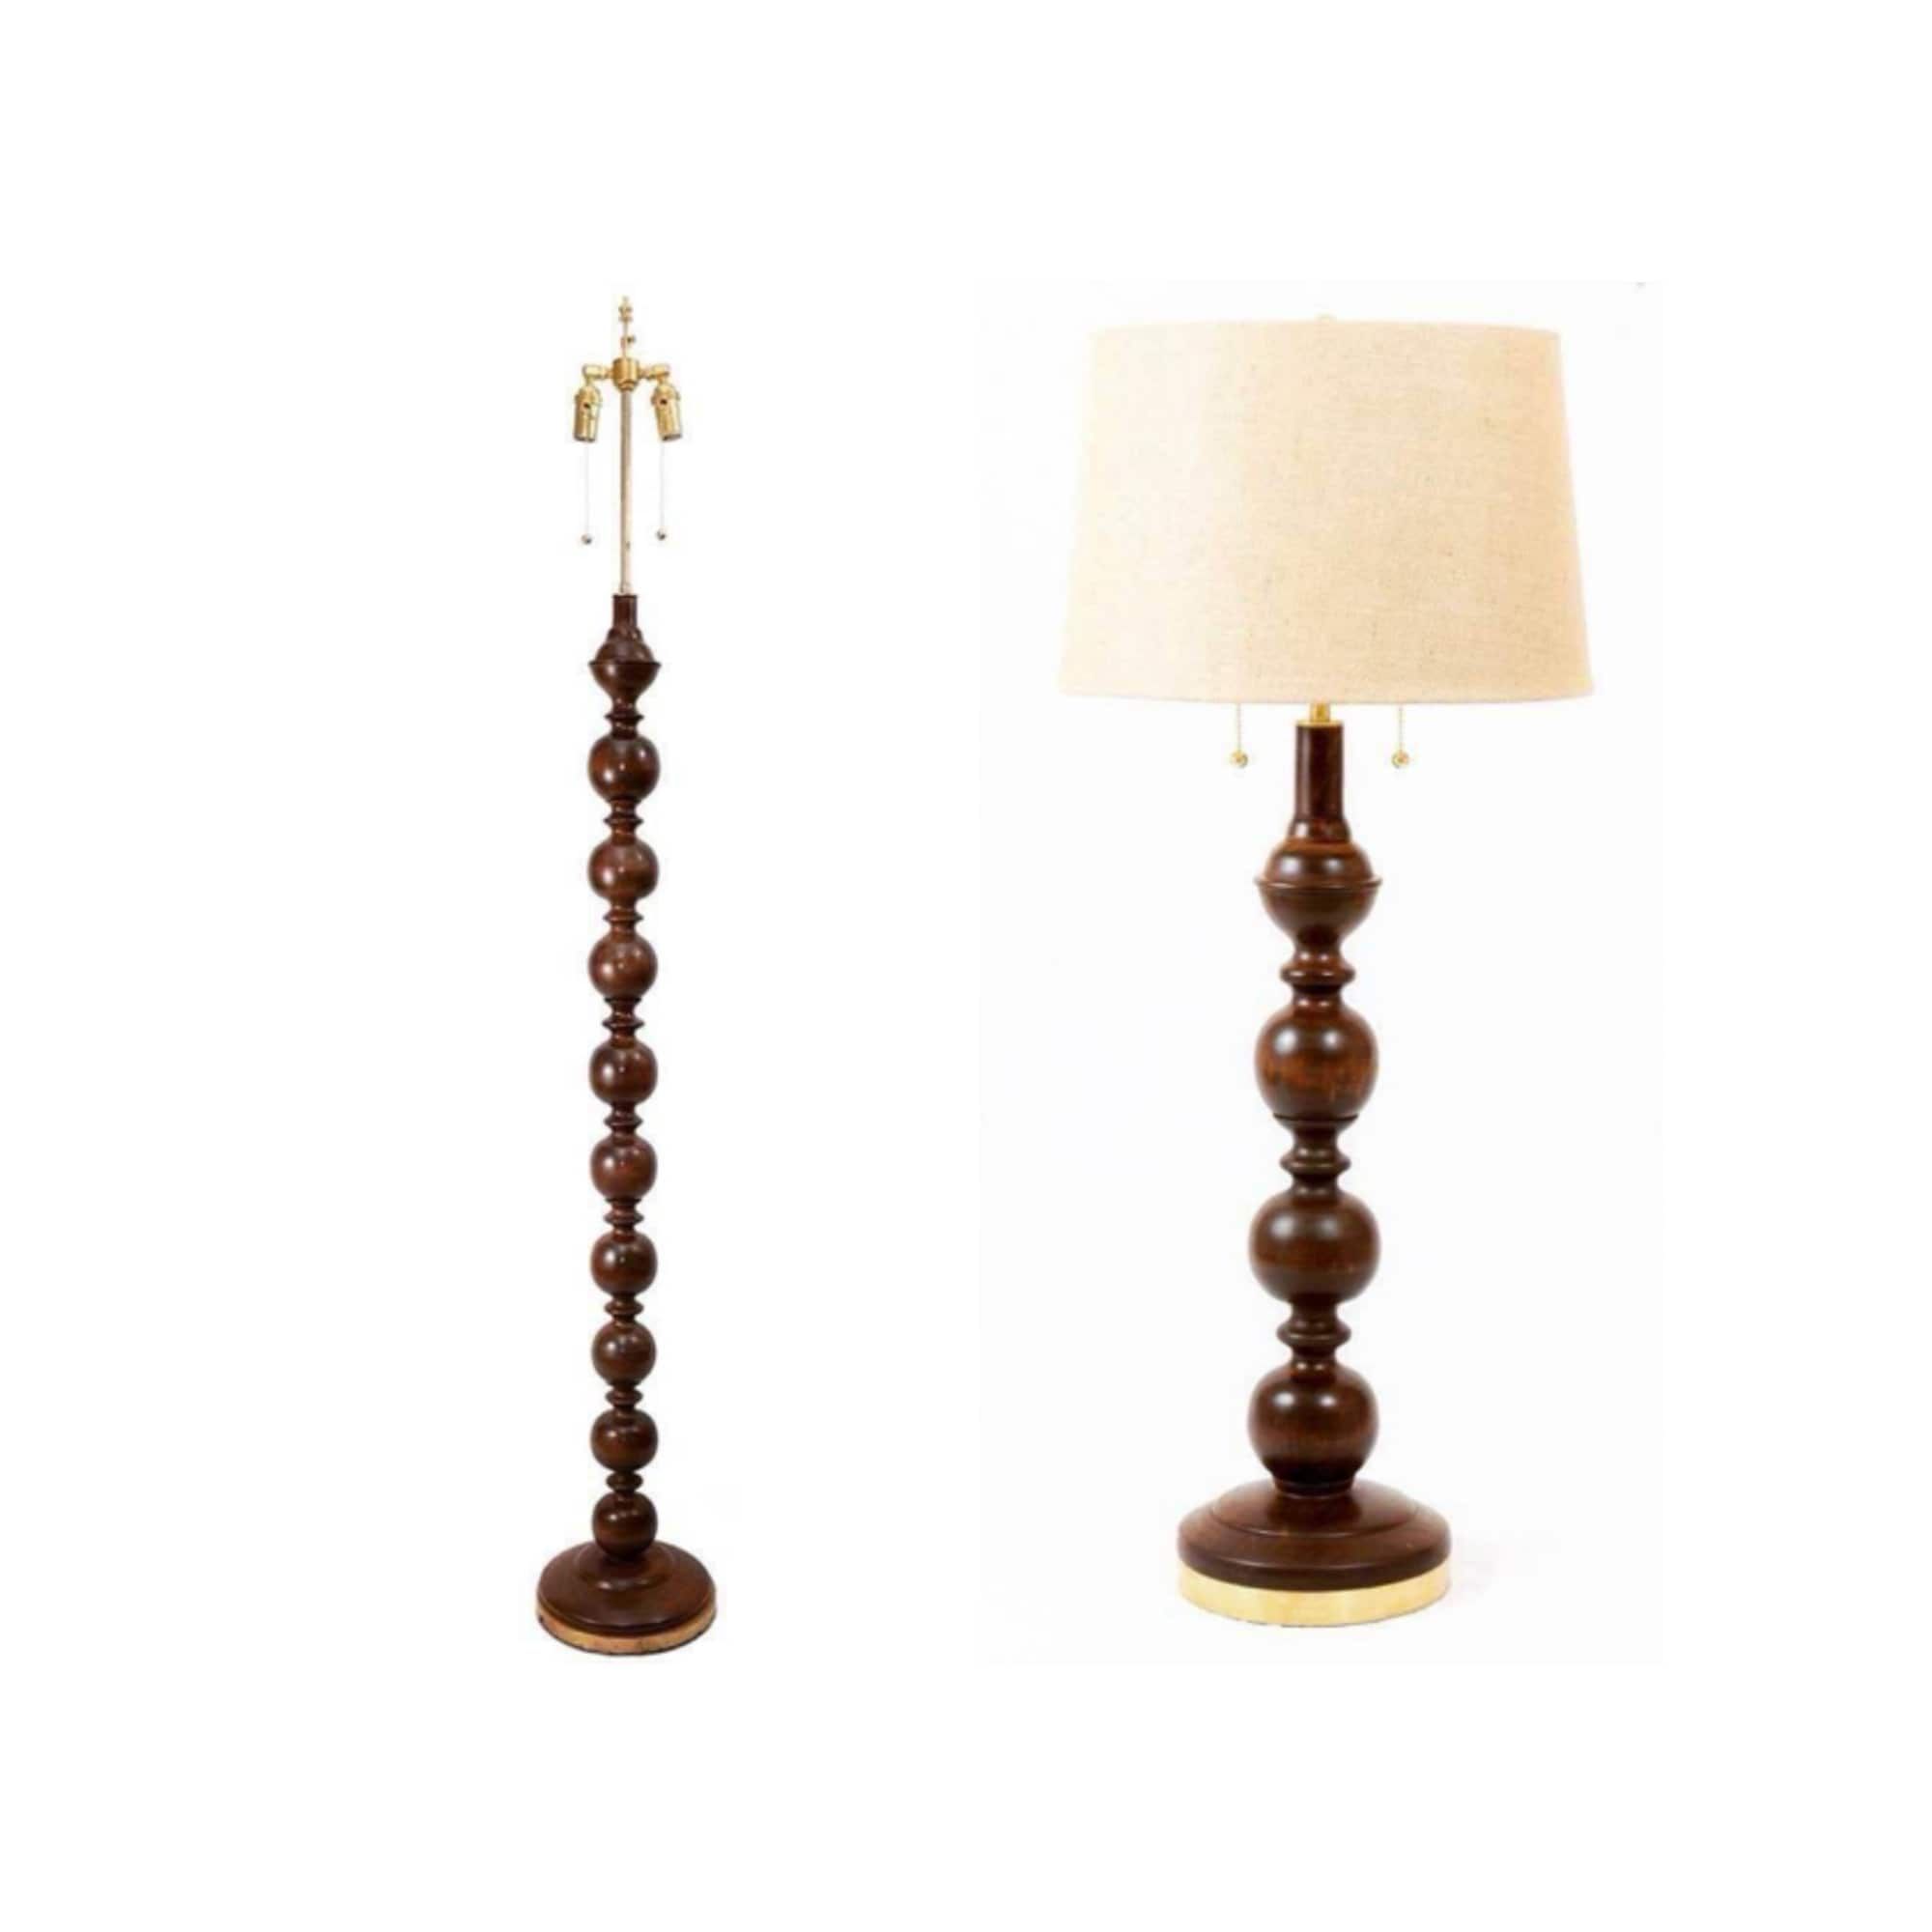 Cherry Floor And Table Lamp Set 2 Table Lamps 1 Floor Lamp – Etsy Intended For Beeswax Finish Floor Lamps (View 12 of 15)